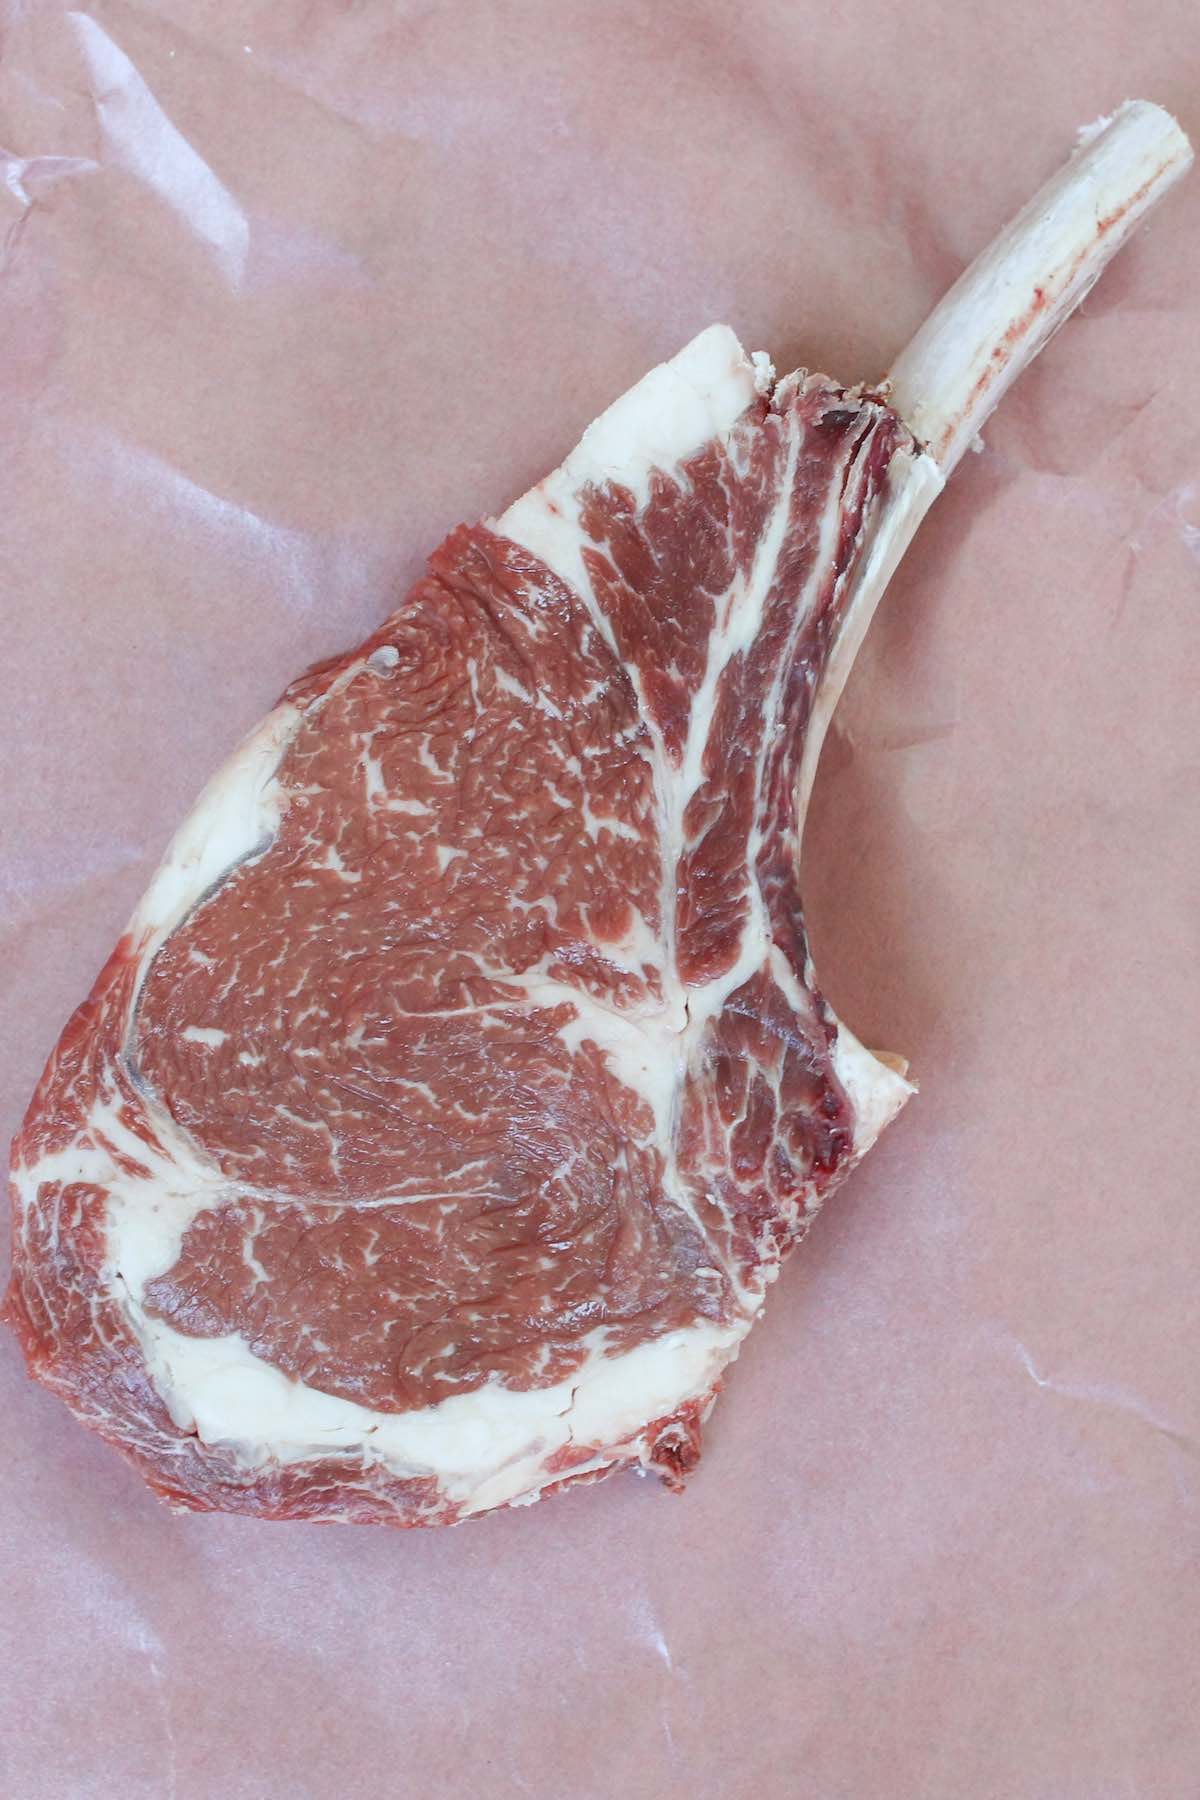 Raw cowboy steak showing the frenched bone and marbling of the meat